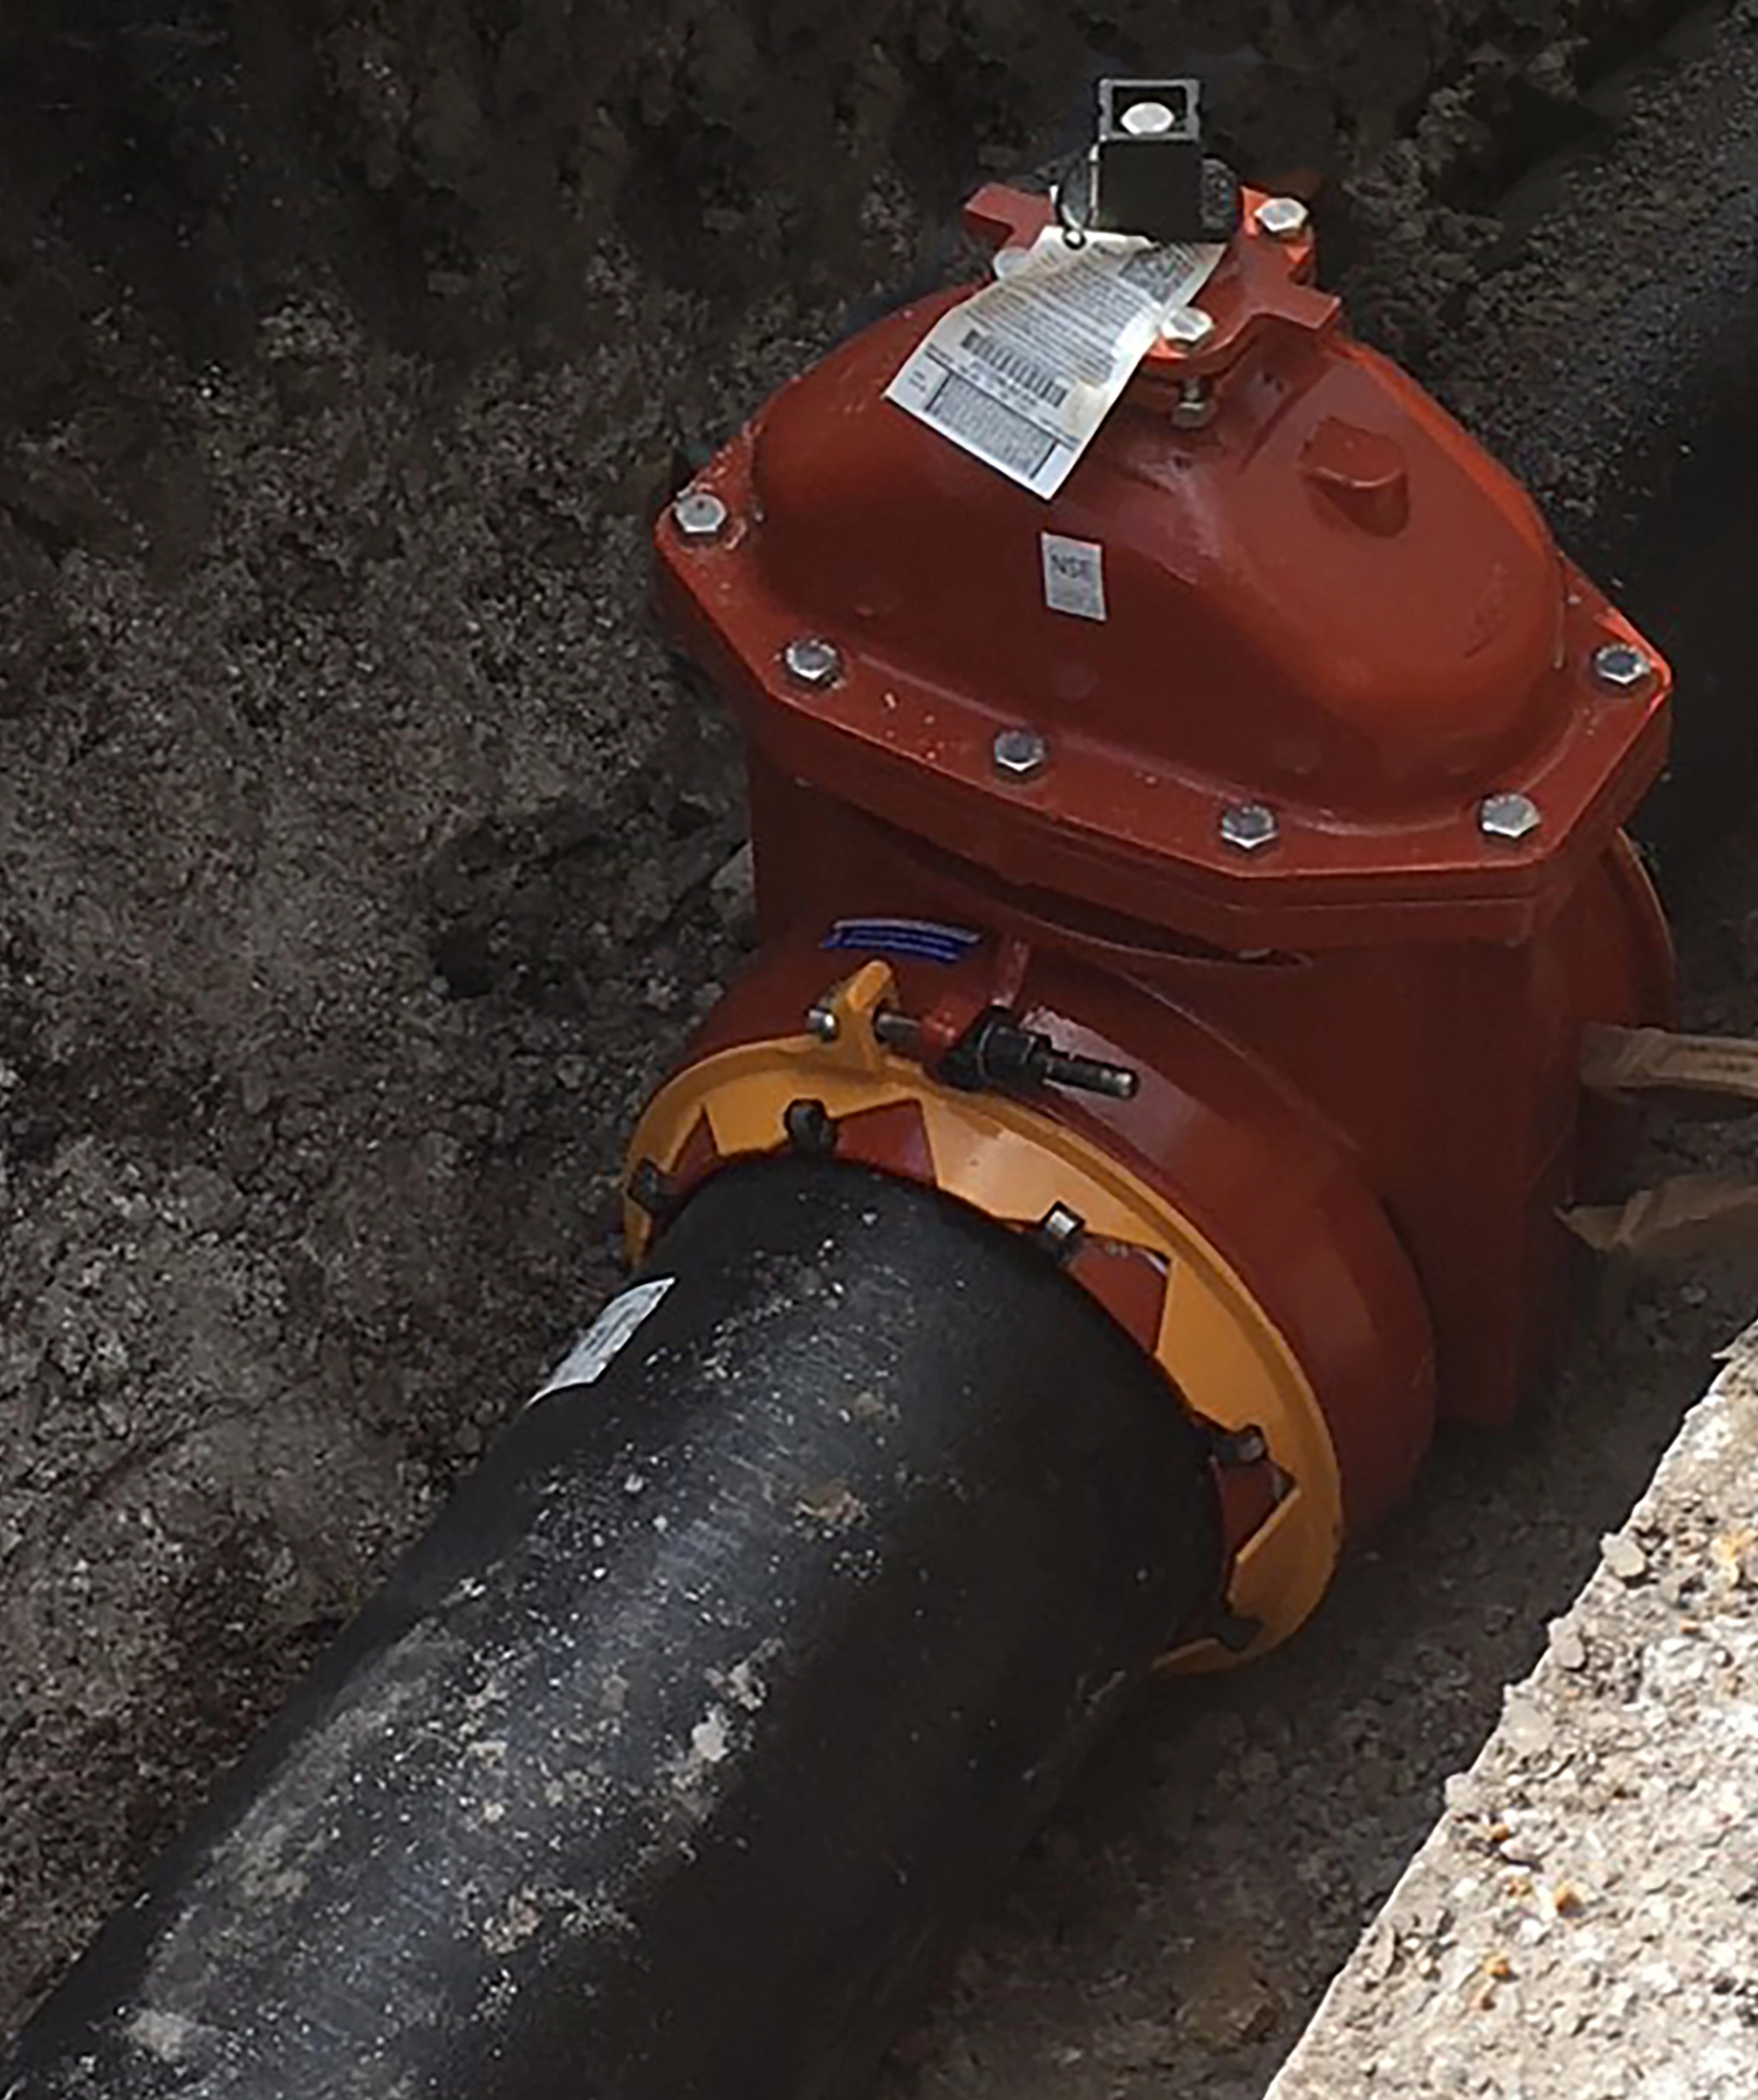 AMERICAN Flow Control’s resilient wedge gate valves with ALPHA restrained joint ends are used on a pipe replacement project for the city of Manning, South Carolina. ALPHA’s single-bolt design saves time and money.